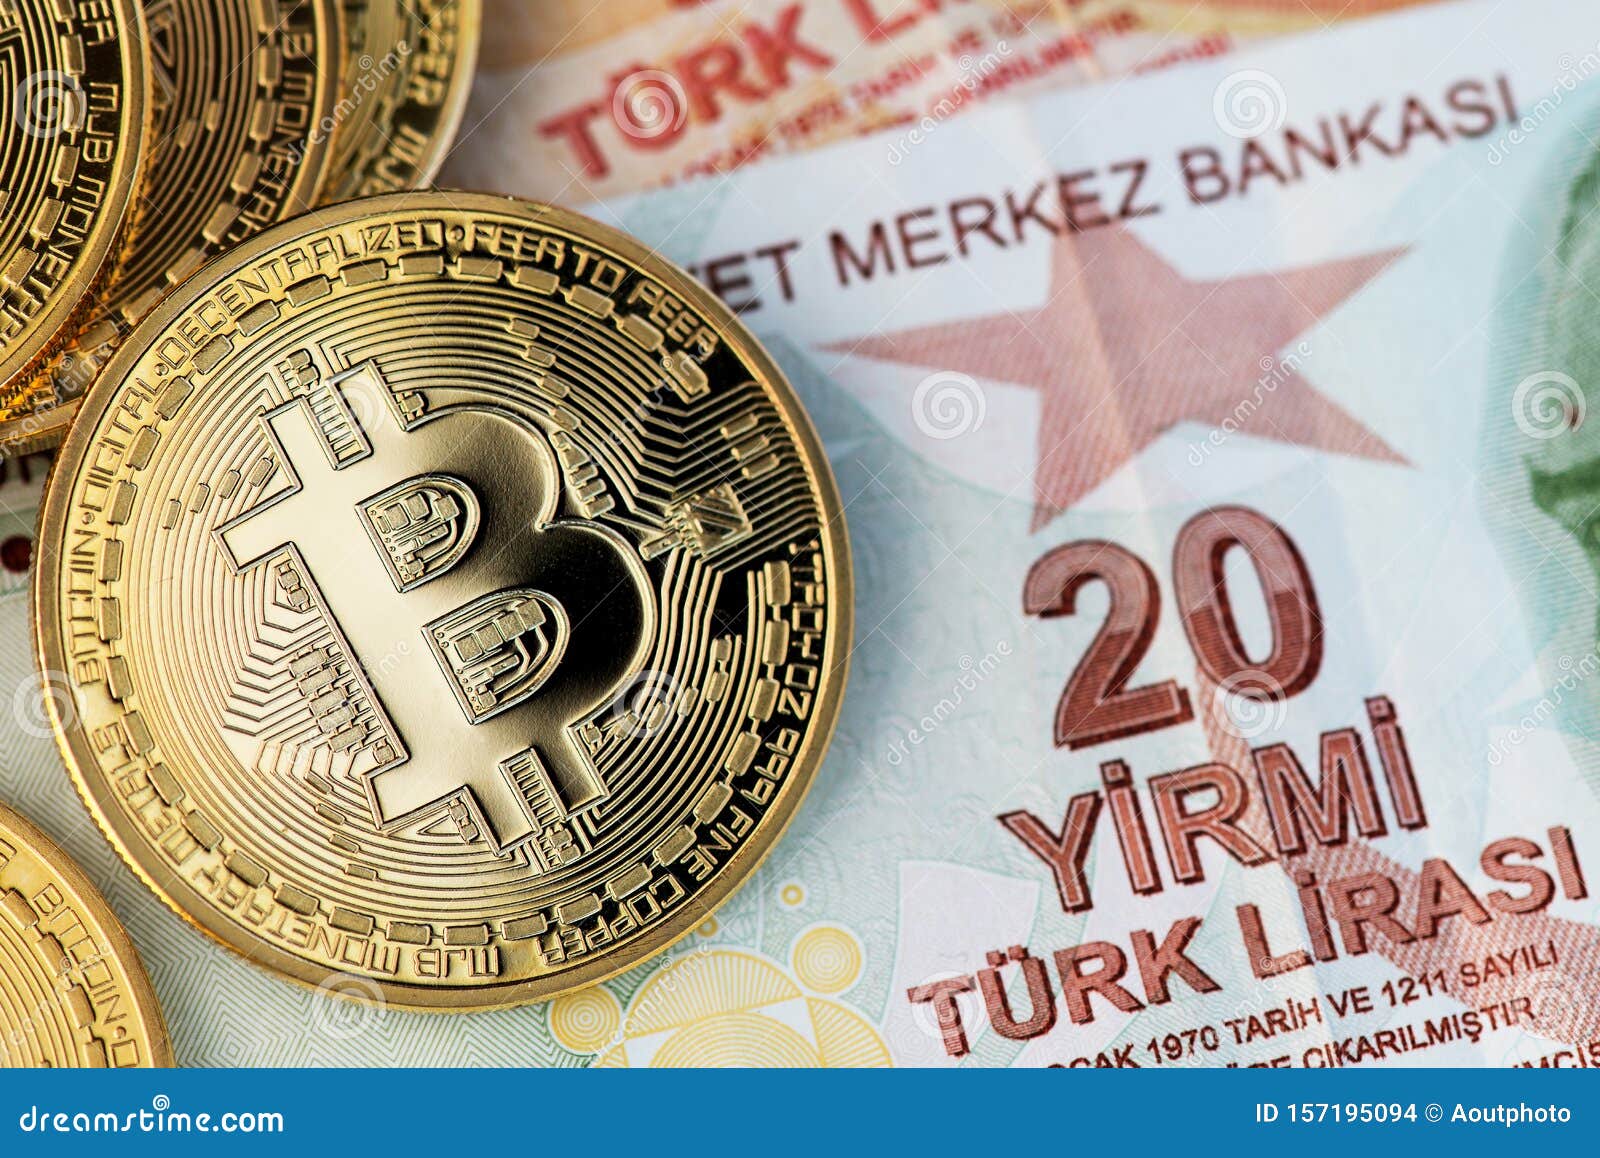 crypto currency in turkey